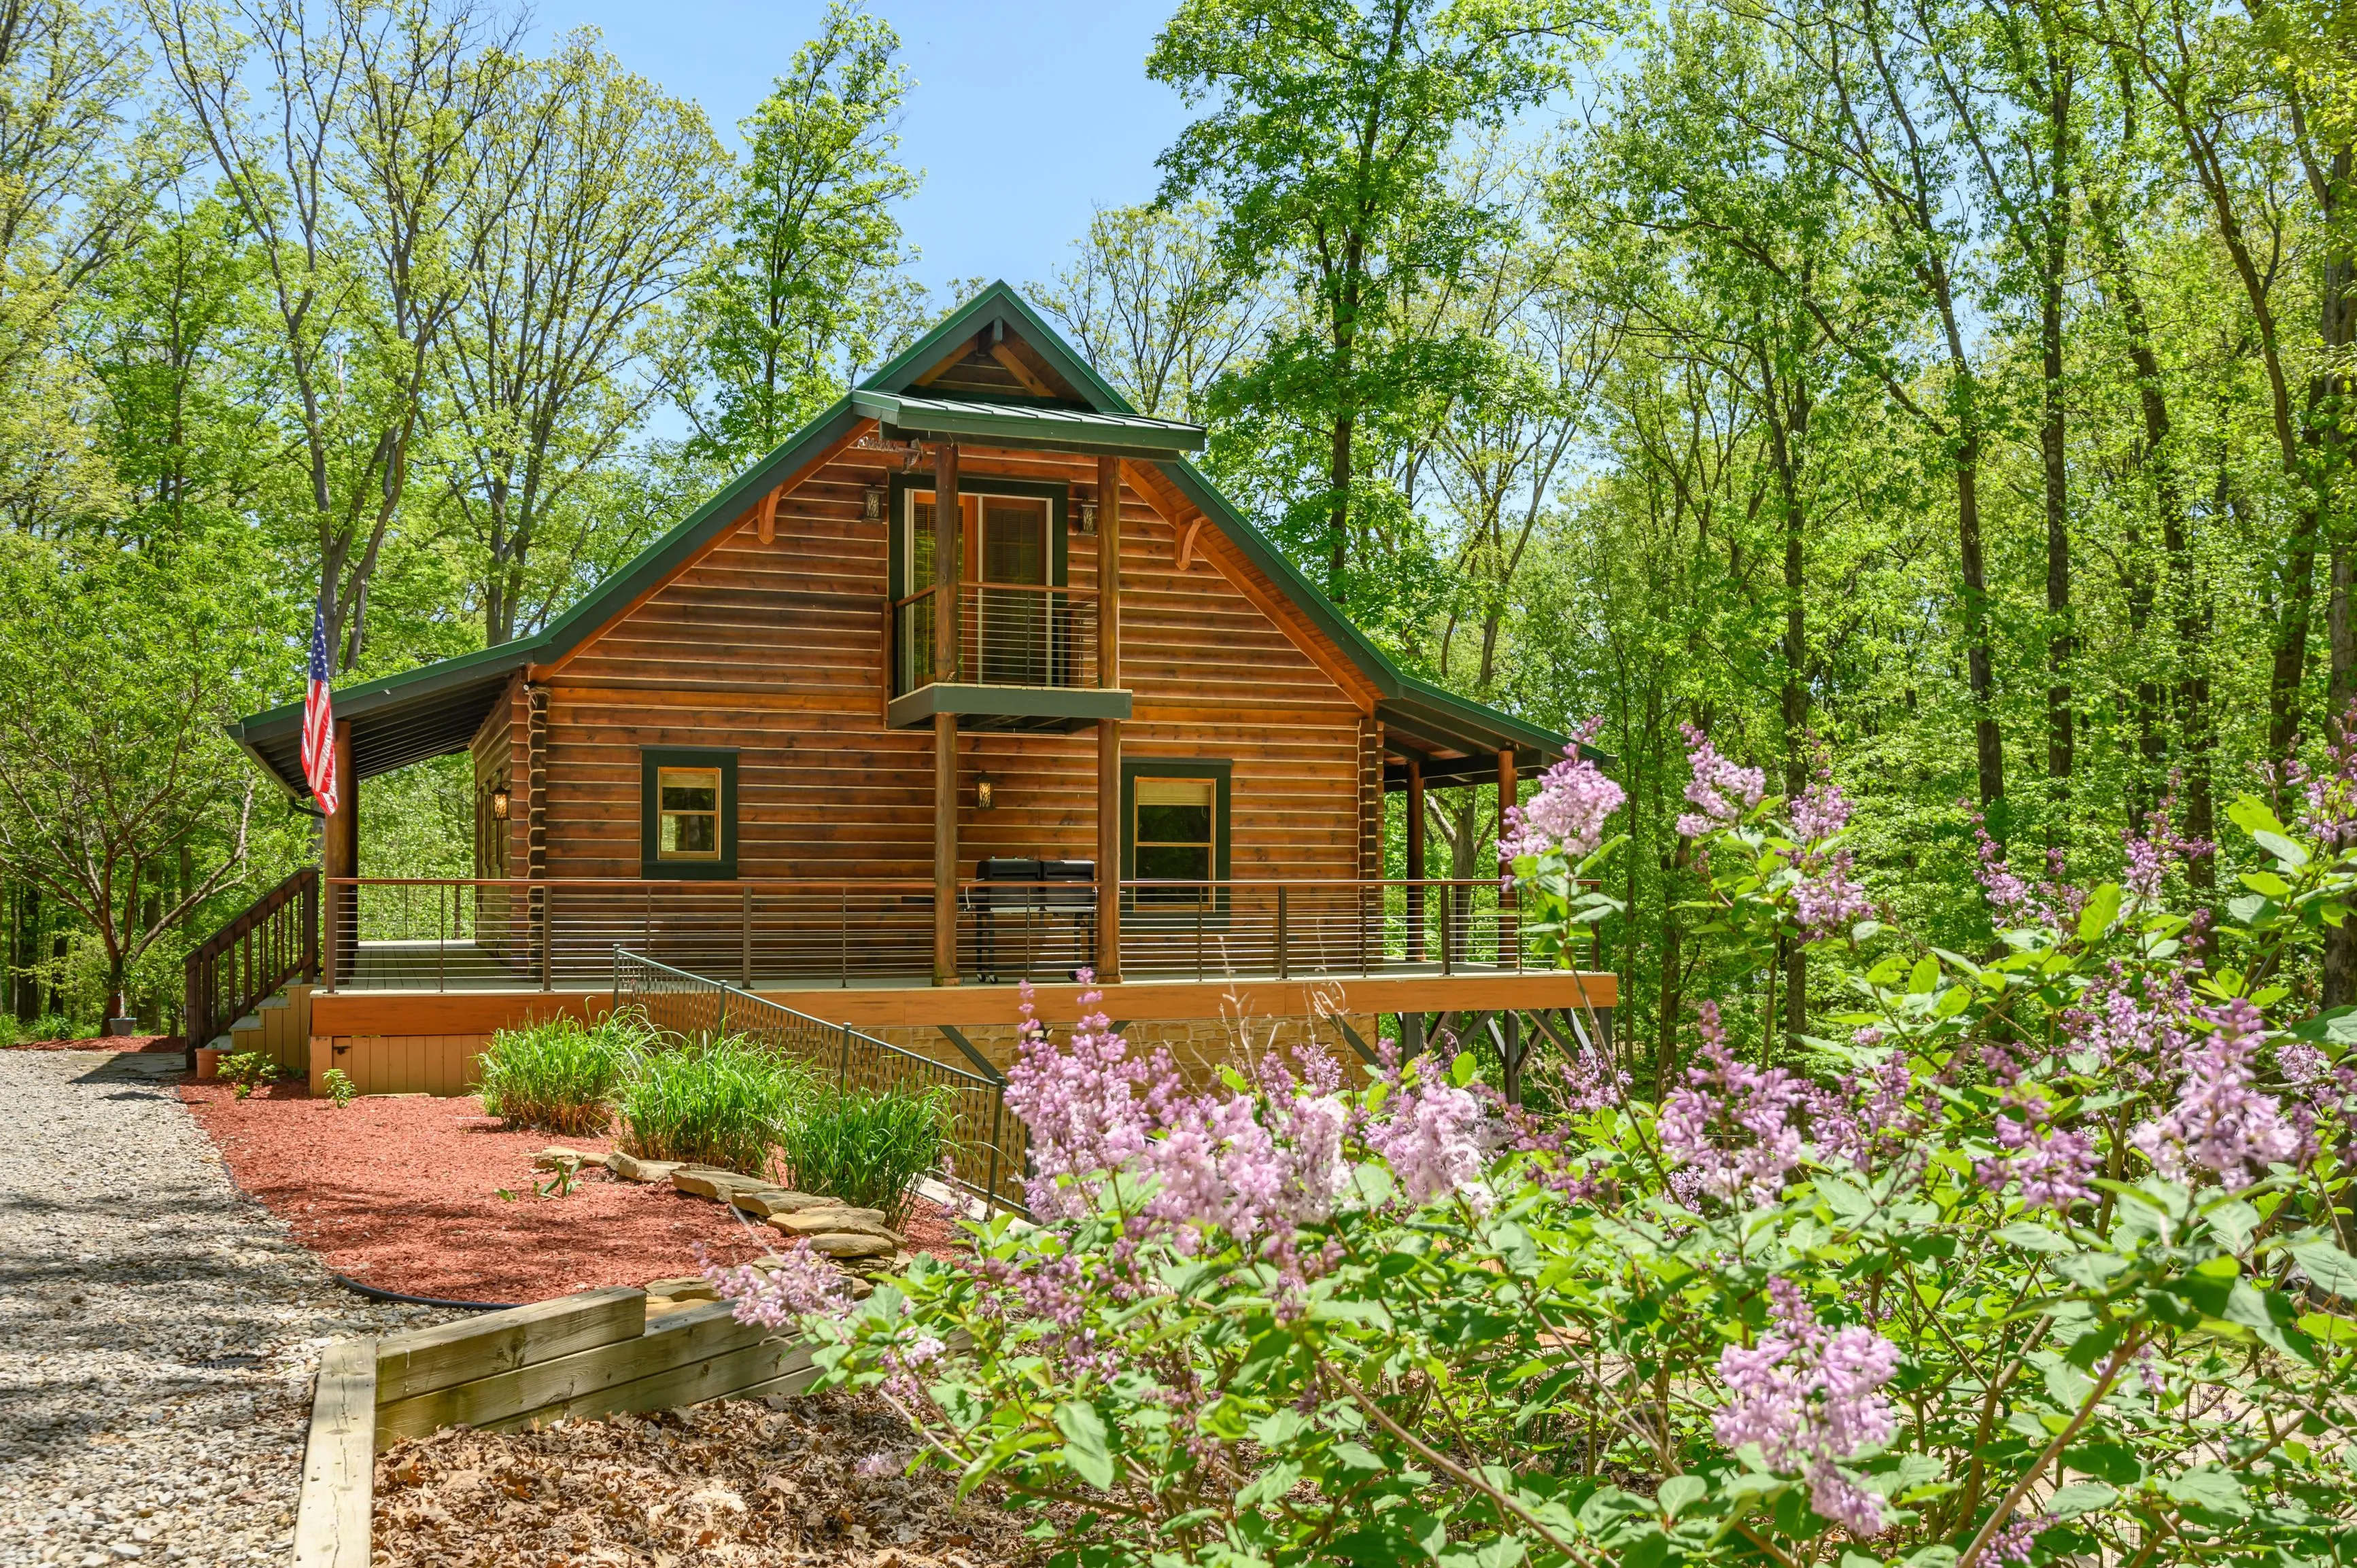 Wooden cabin surrounded by forest with blooming lilac flowers in the foreground.